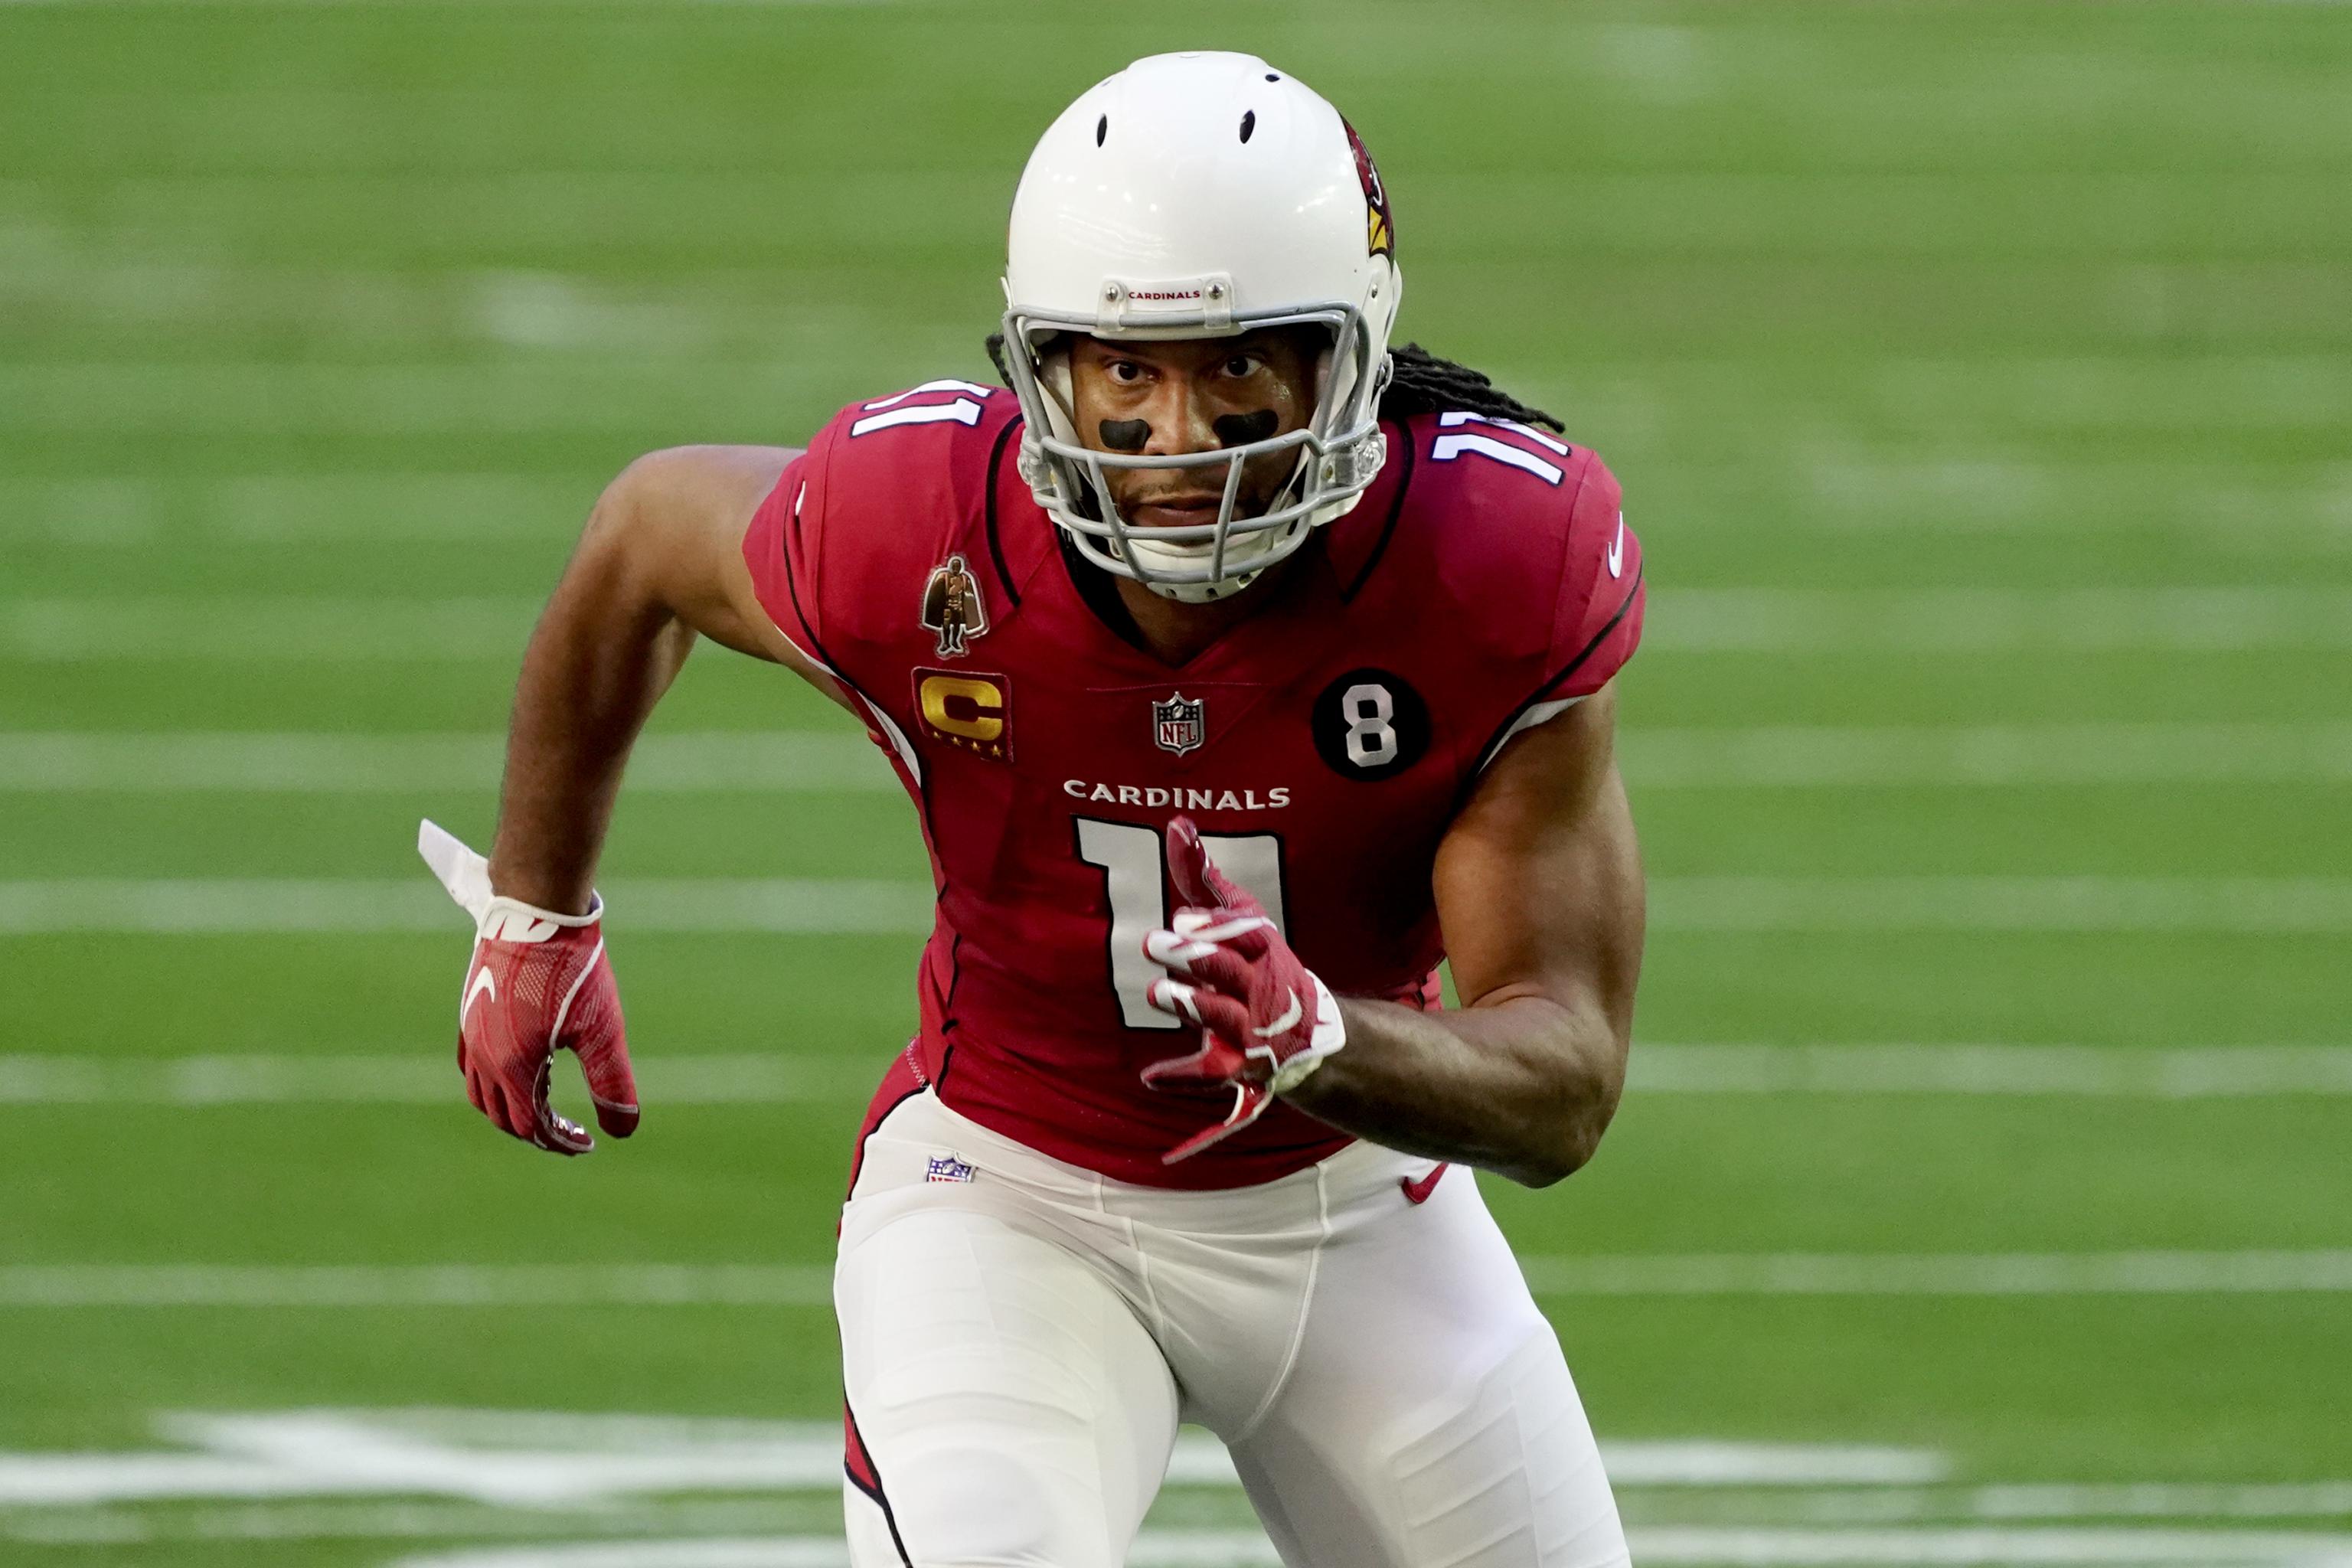 Nfl Execs Reportedly Expect Larry Fitzgerald To Retire Before 2021 Season Bleacher Report Latest News Videos And Highlights [ 2048 x 3072 Pixel ]